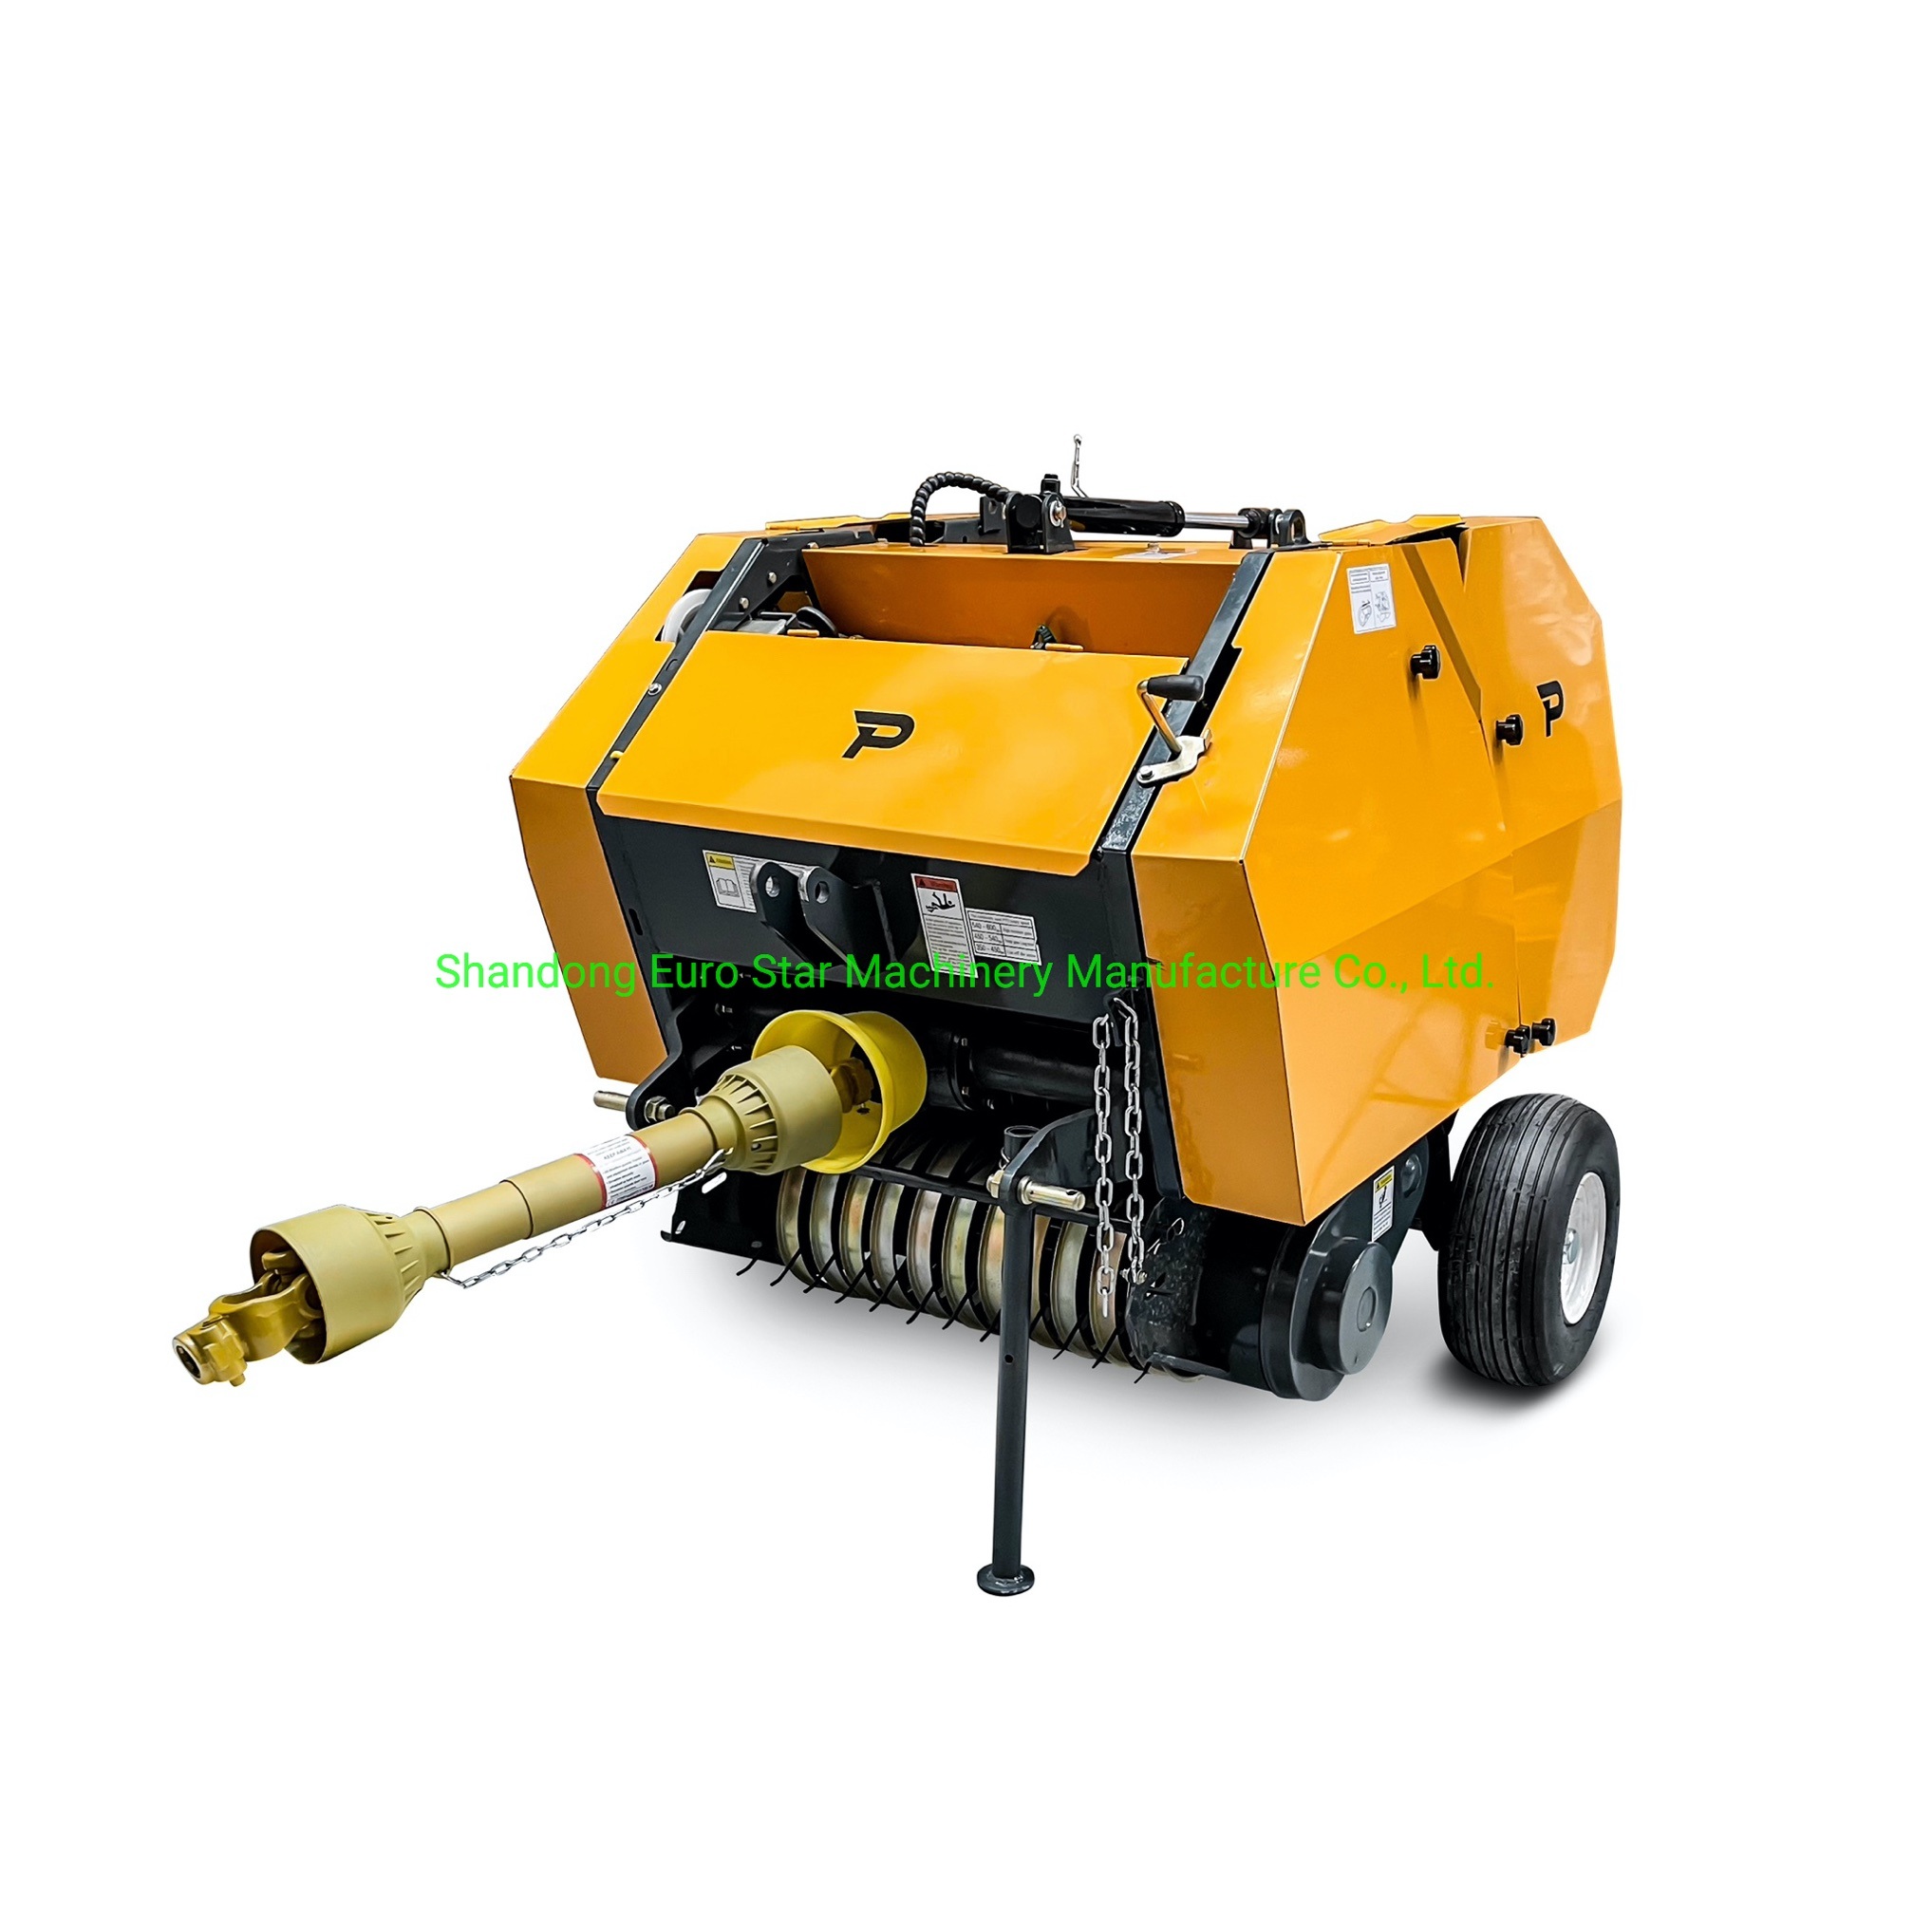 CE-Round-Hay-Baler-9yk9010-Mini-Large-Small-Square-Grass-Silage-Straw-Packing-Machine-Baling-Press-Rectangular-Farm-Agricultural-Tractor-Power-Tiller-Machinery.jpg